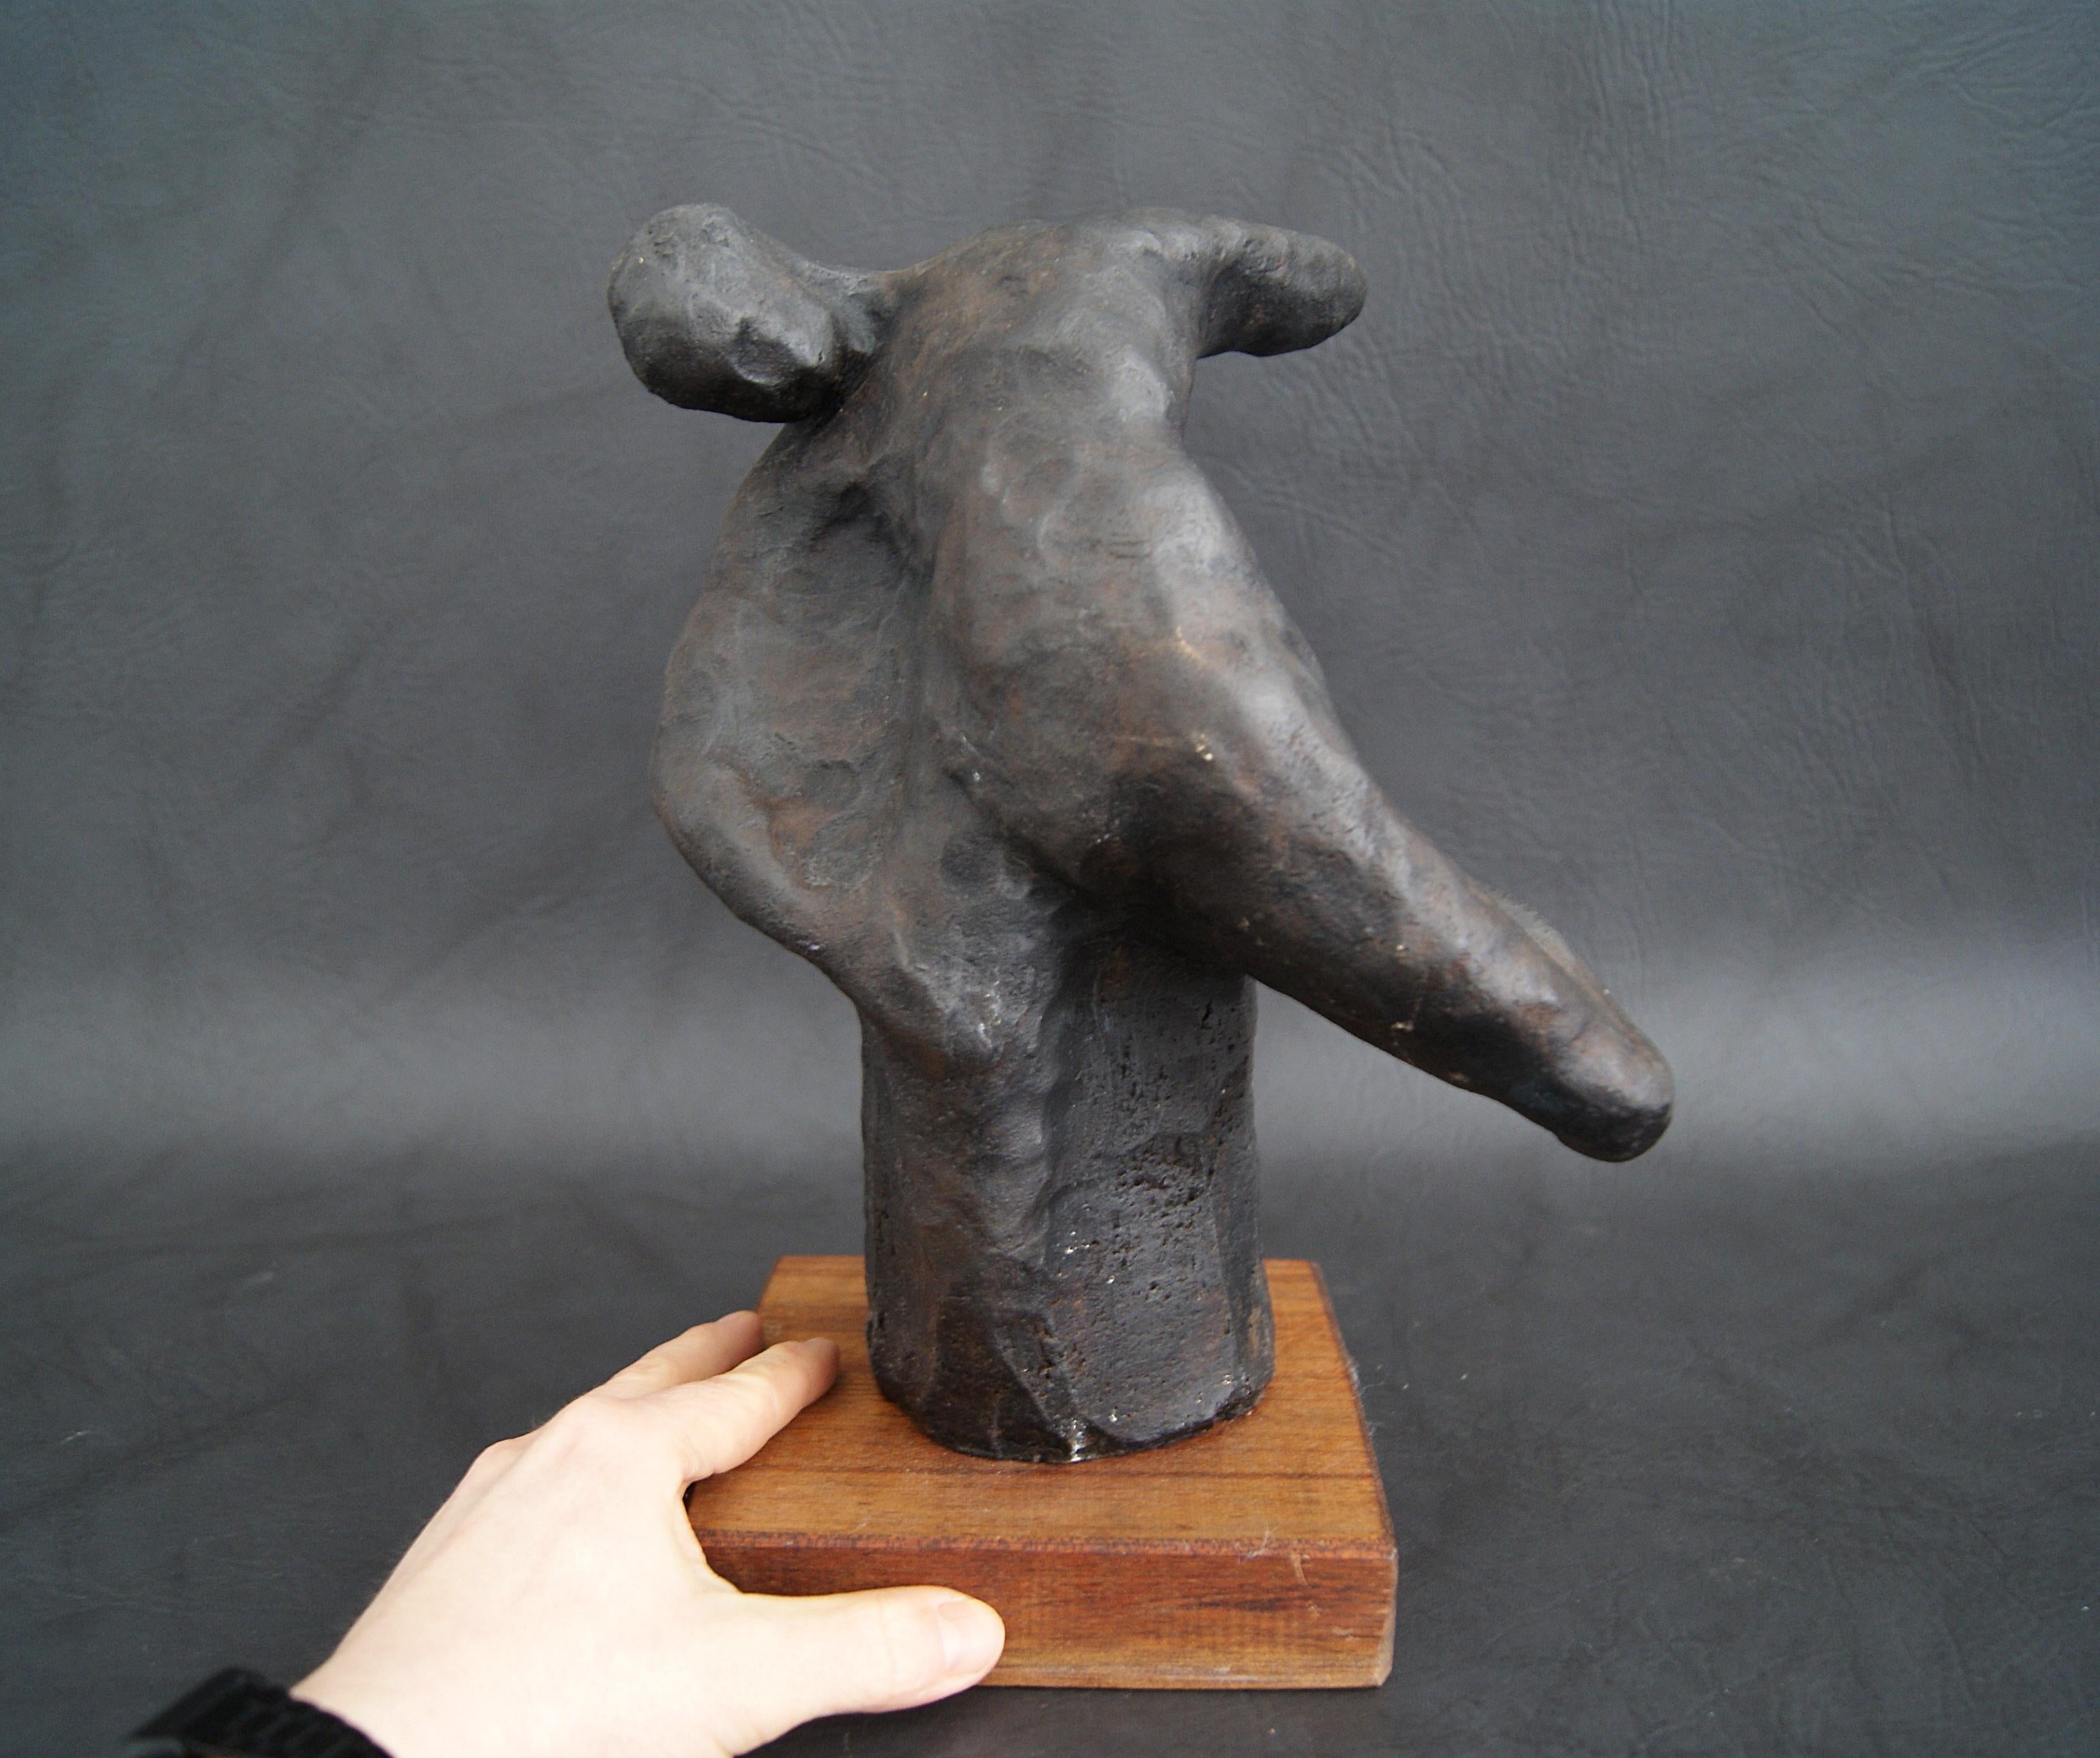 Hand-formed sculpture made of plaster of paris with patinated bronze on a wooden base. The plaster figure is from the German artist TADÄUS from the series formless body shapes from 2002. A very decorative individual piece that invites you to